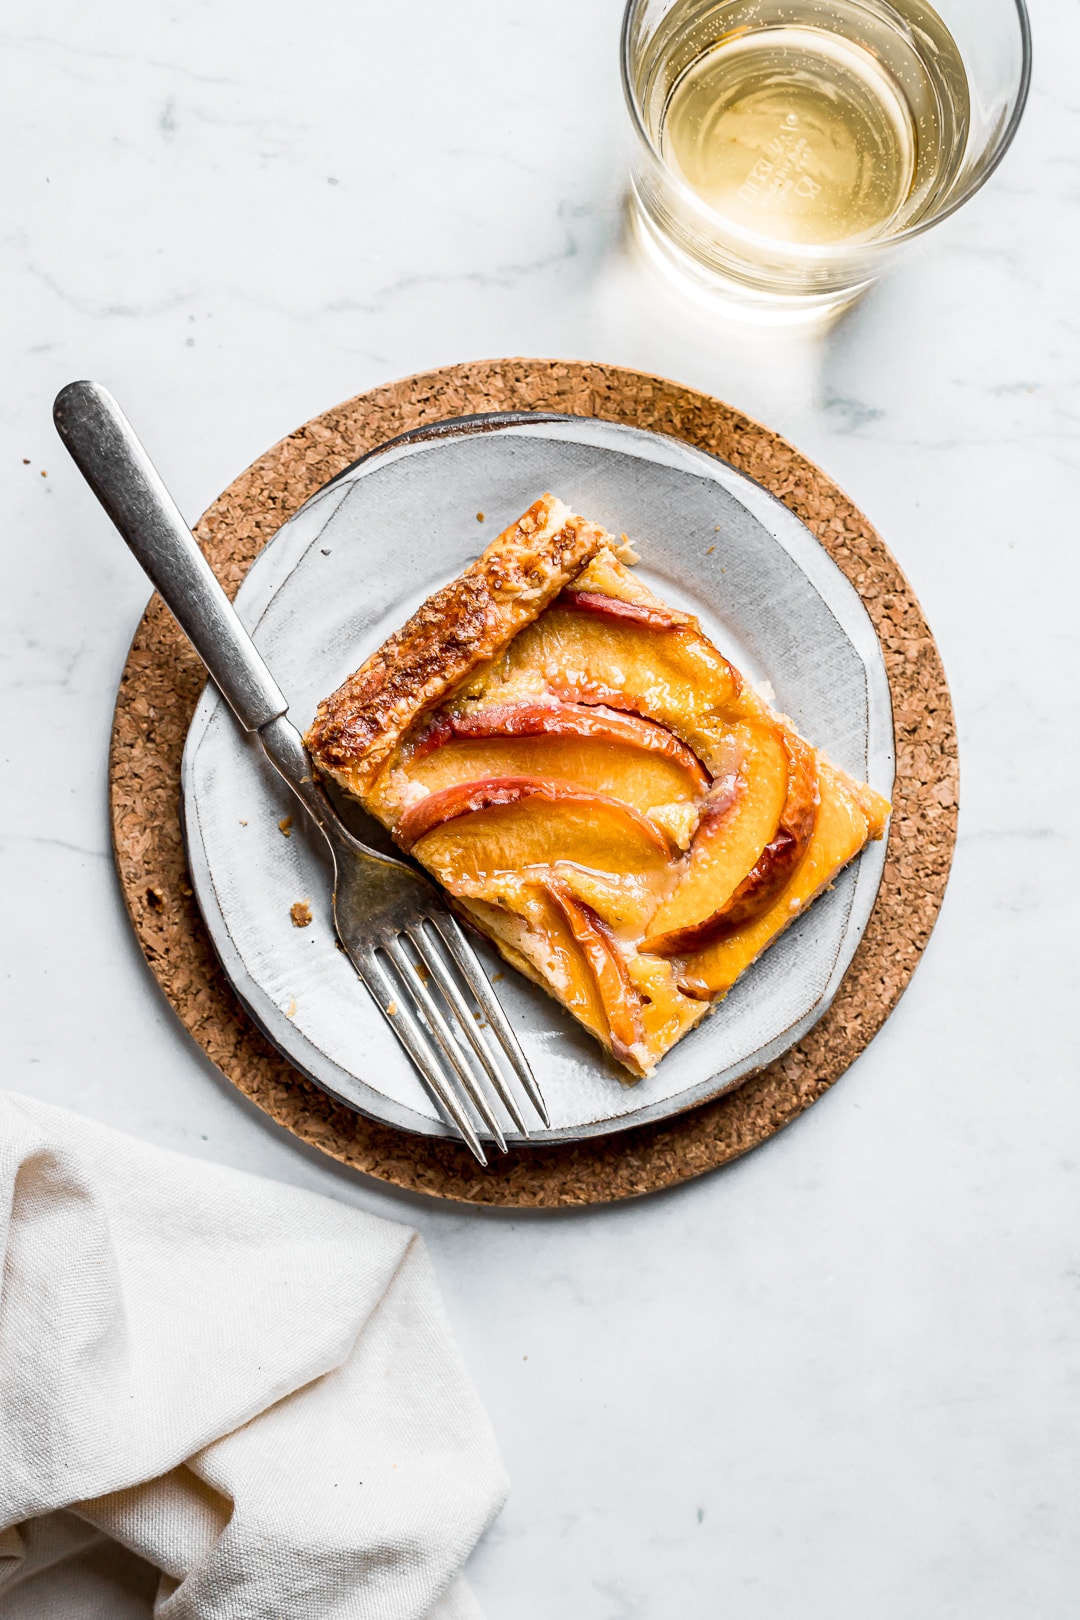 Slice of peach galette on plate with marble background